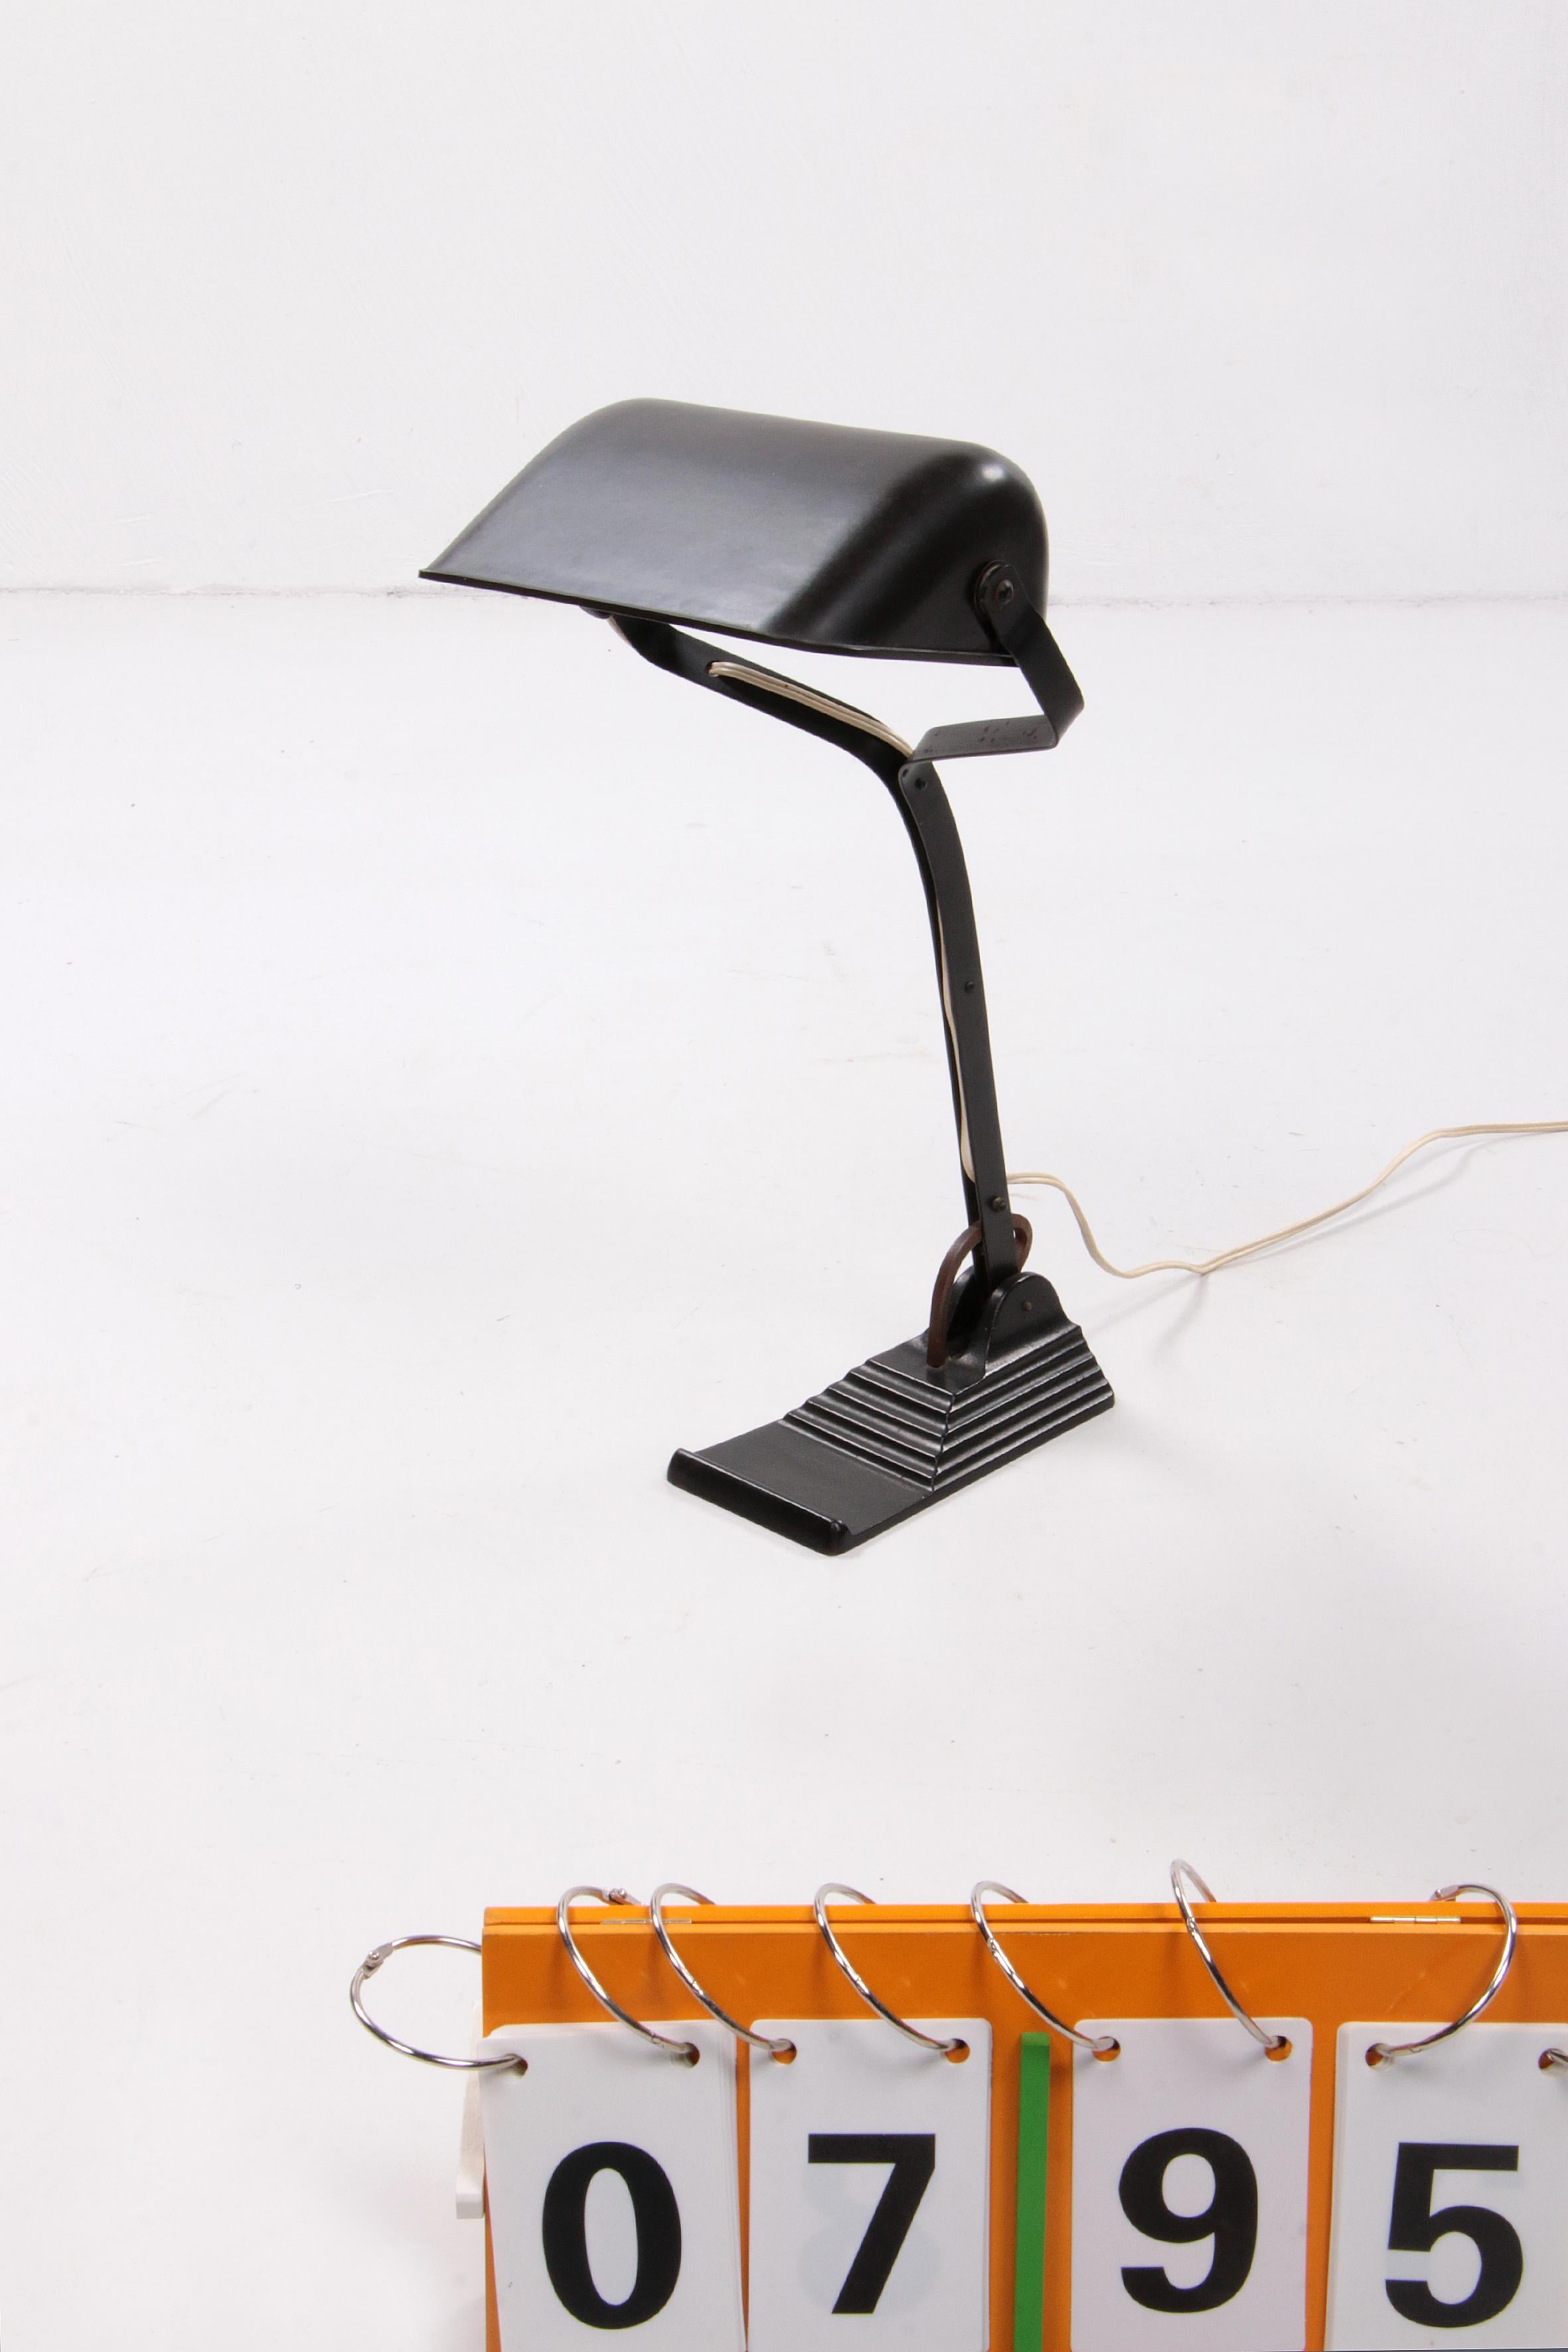 Mid-Century Modern Art Deco desk lamp also called (notary lamp) made by Erpe Belgium.